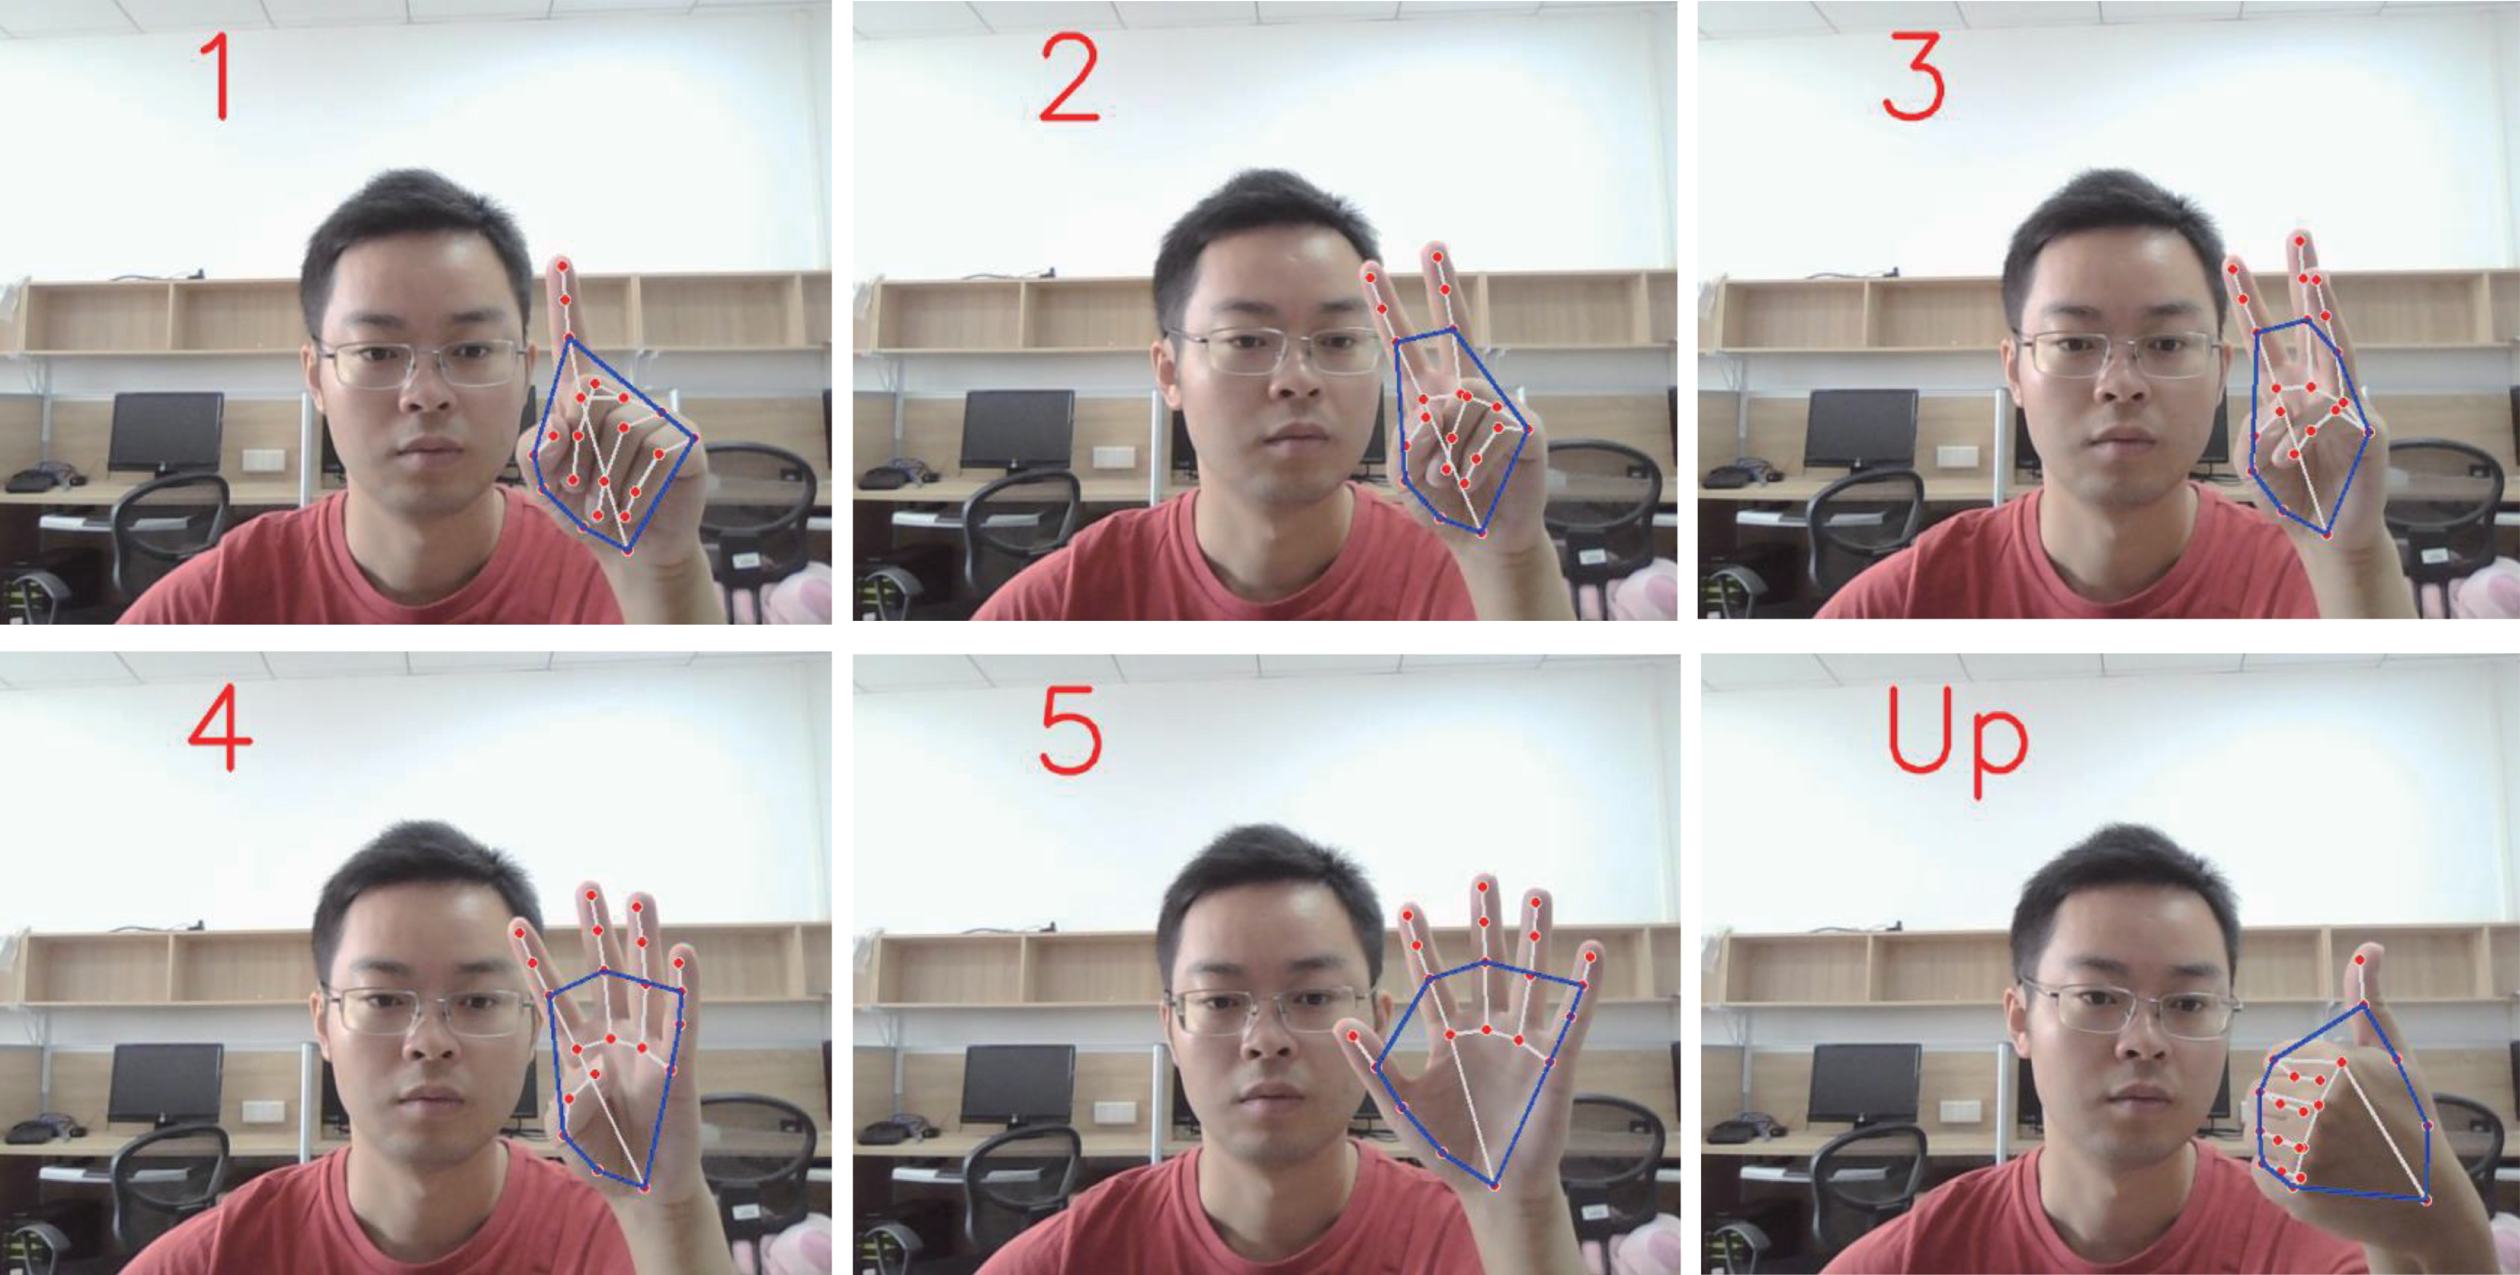 Hand pose estimation is applied to gesture recognition.